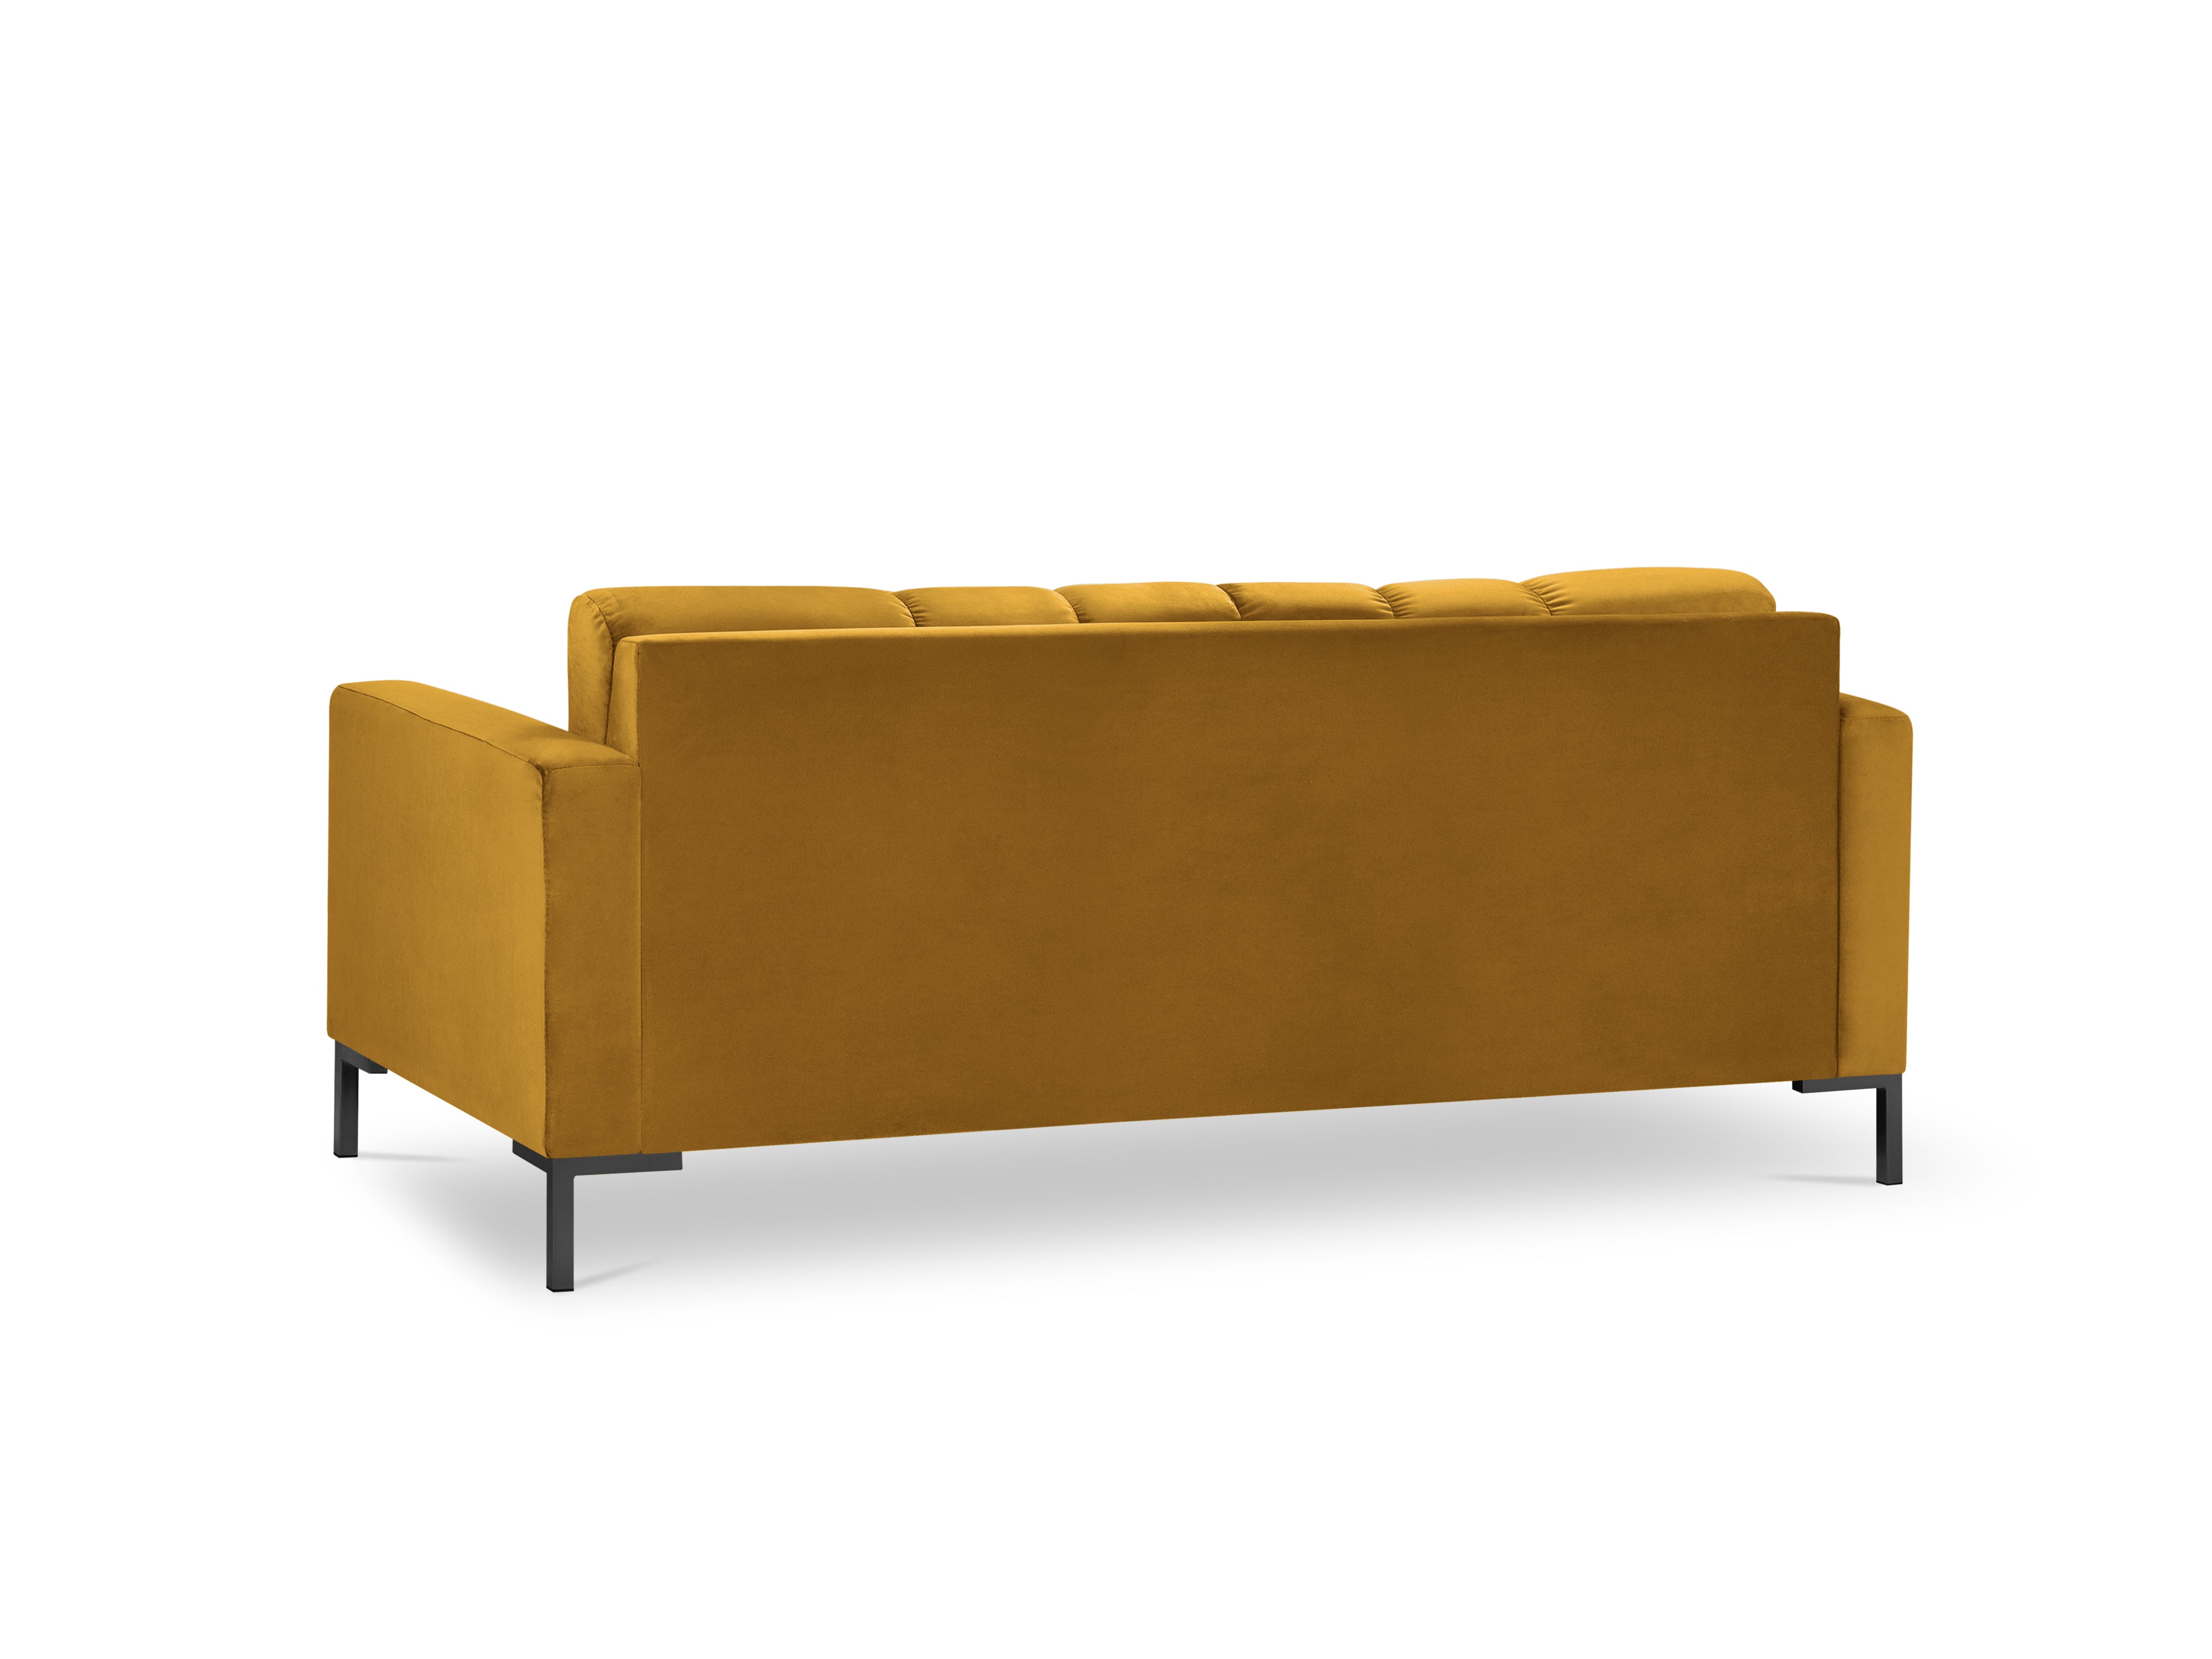 Sofa with armrests velvety yellow